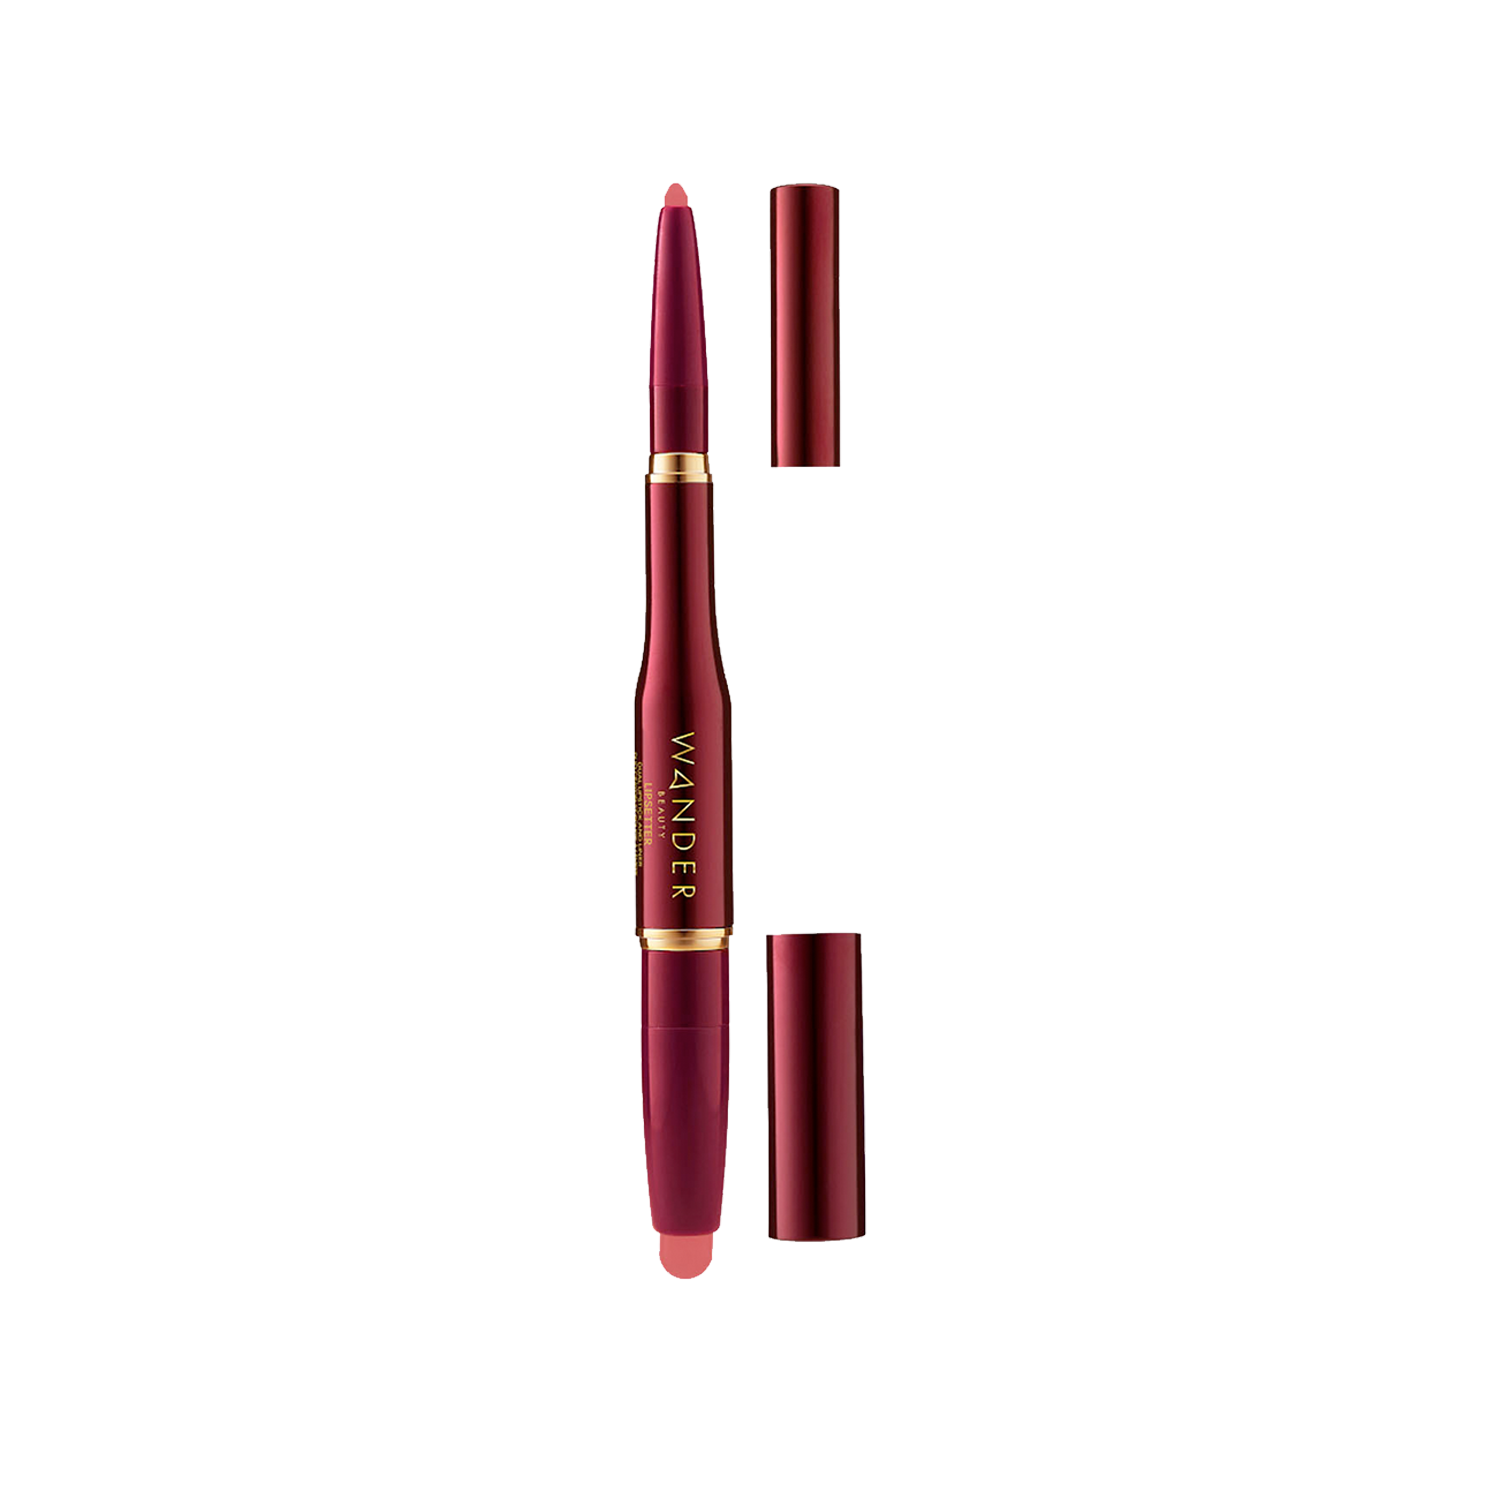 Lipsetter Dual Lipstick and Liner Wander Beauty Lipsetter Dual Lipstick and Liner - Bold in Bejing 1